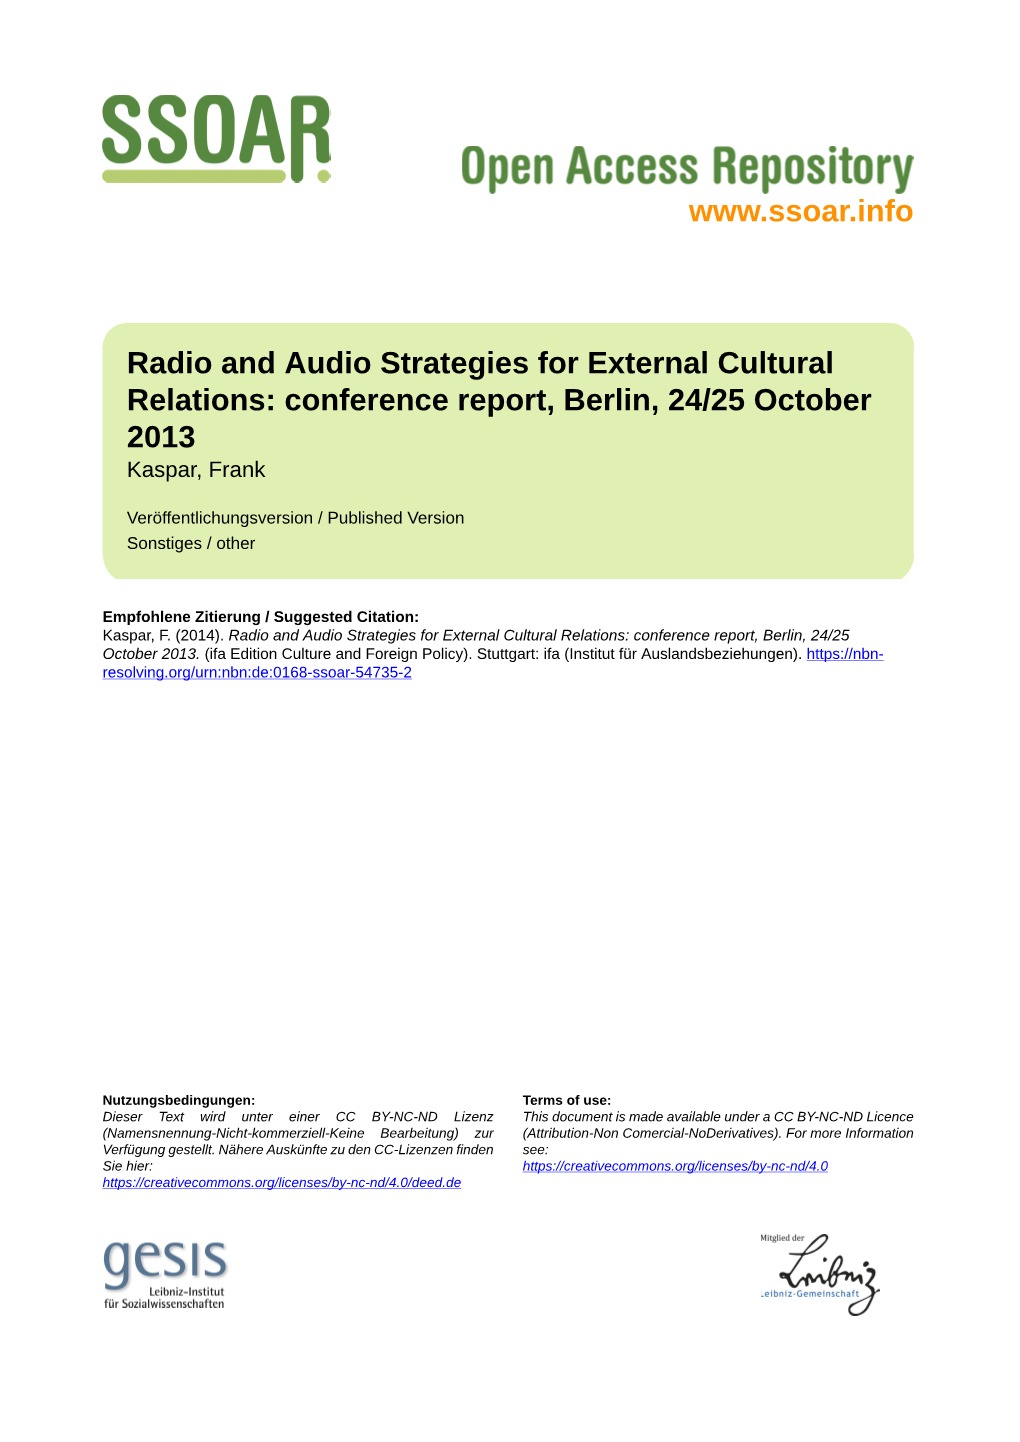 Radio and Audio Strategies for External Cultural Relations: Conference Report, Berlin, 24/25 October 2013 Kaspar, Frank